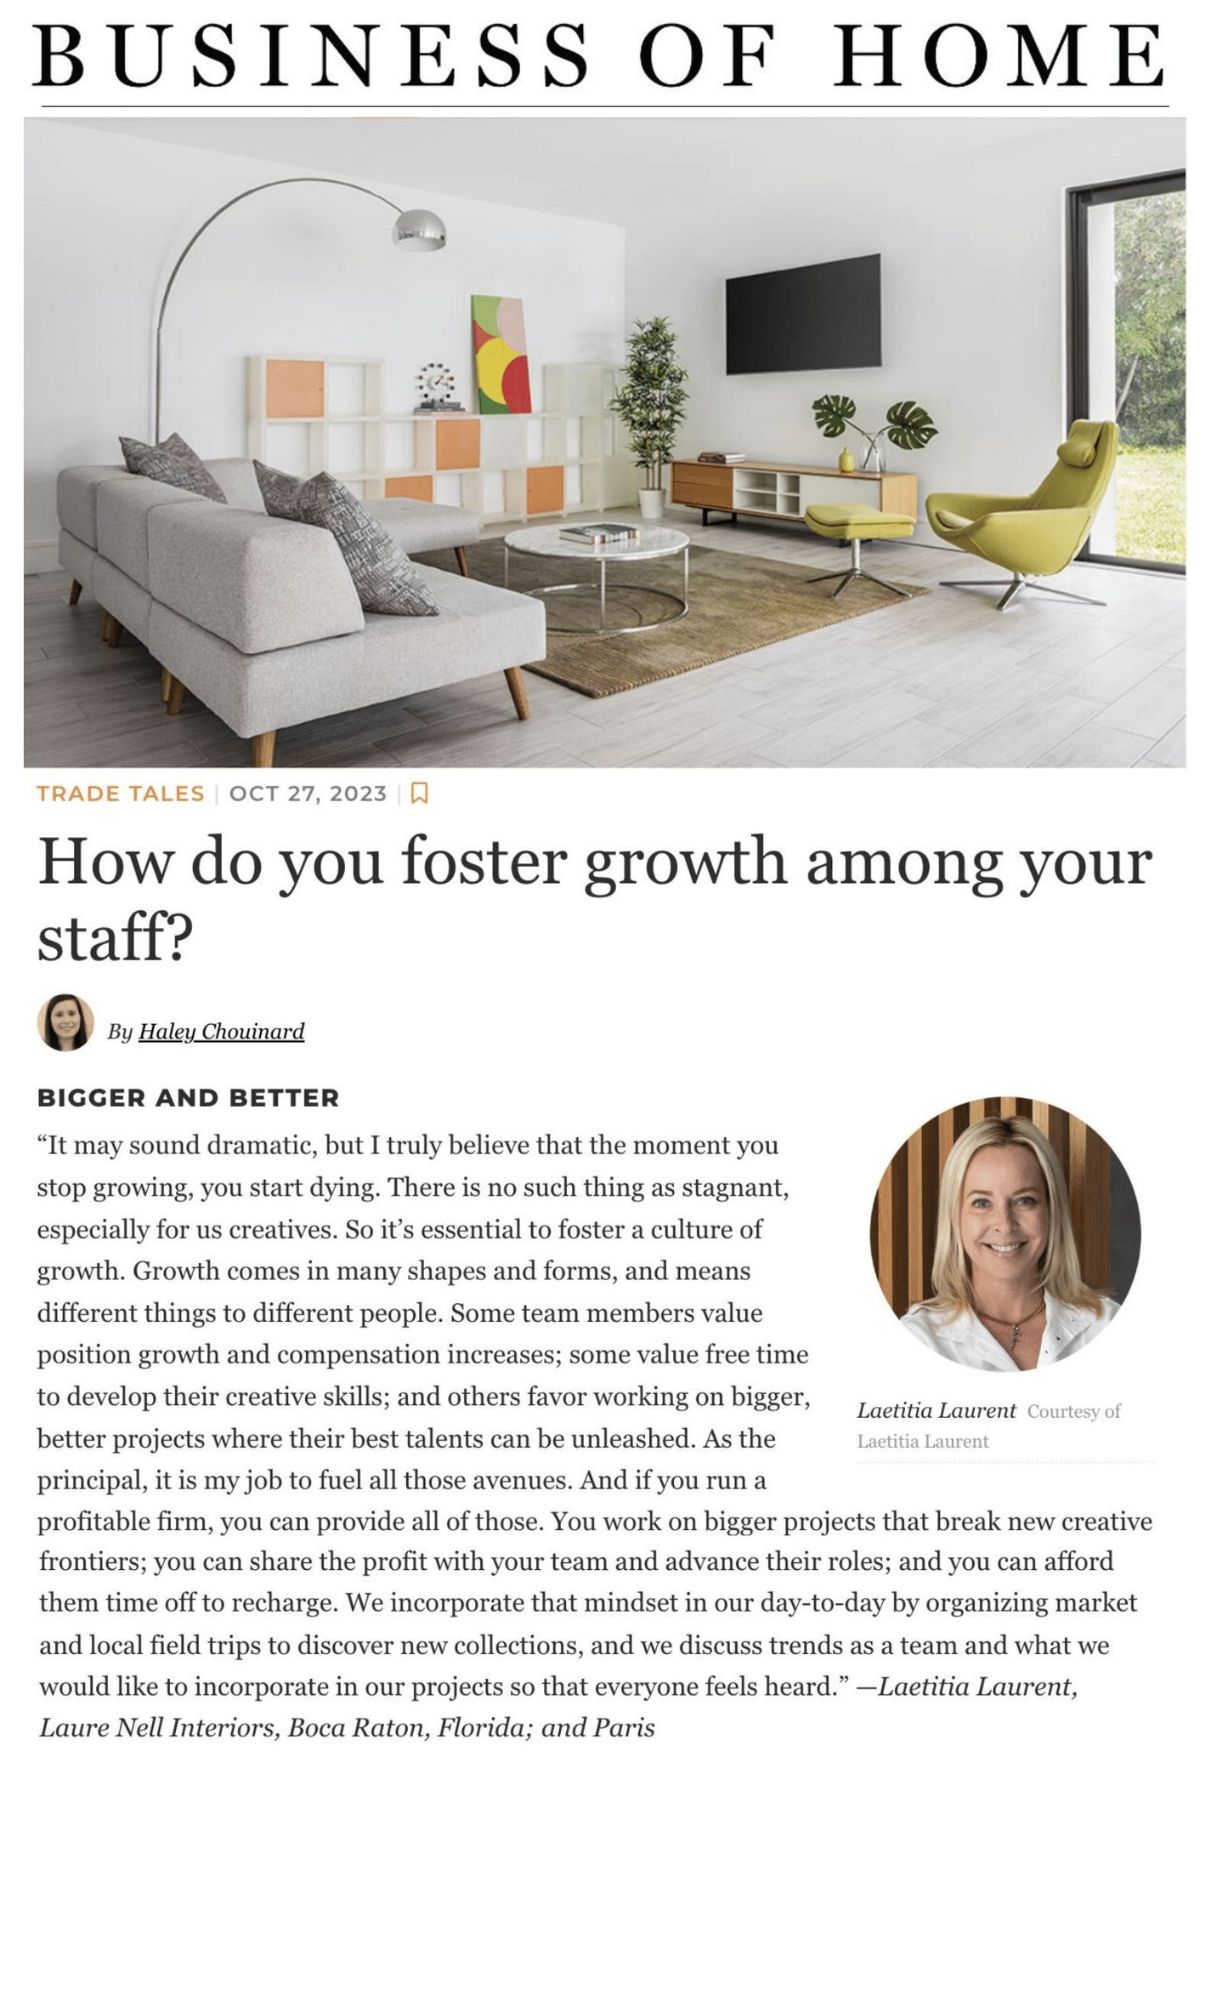 Business of Home: Trade Tales How do you foster growth among your staff?